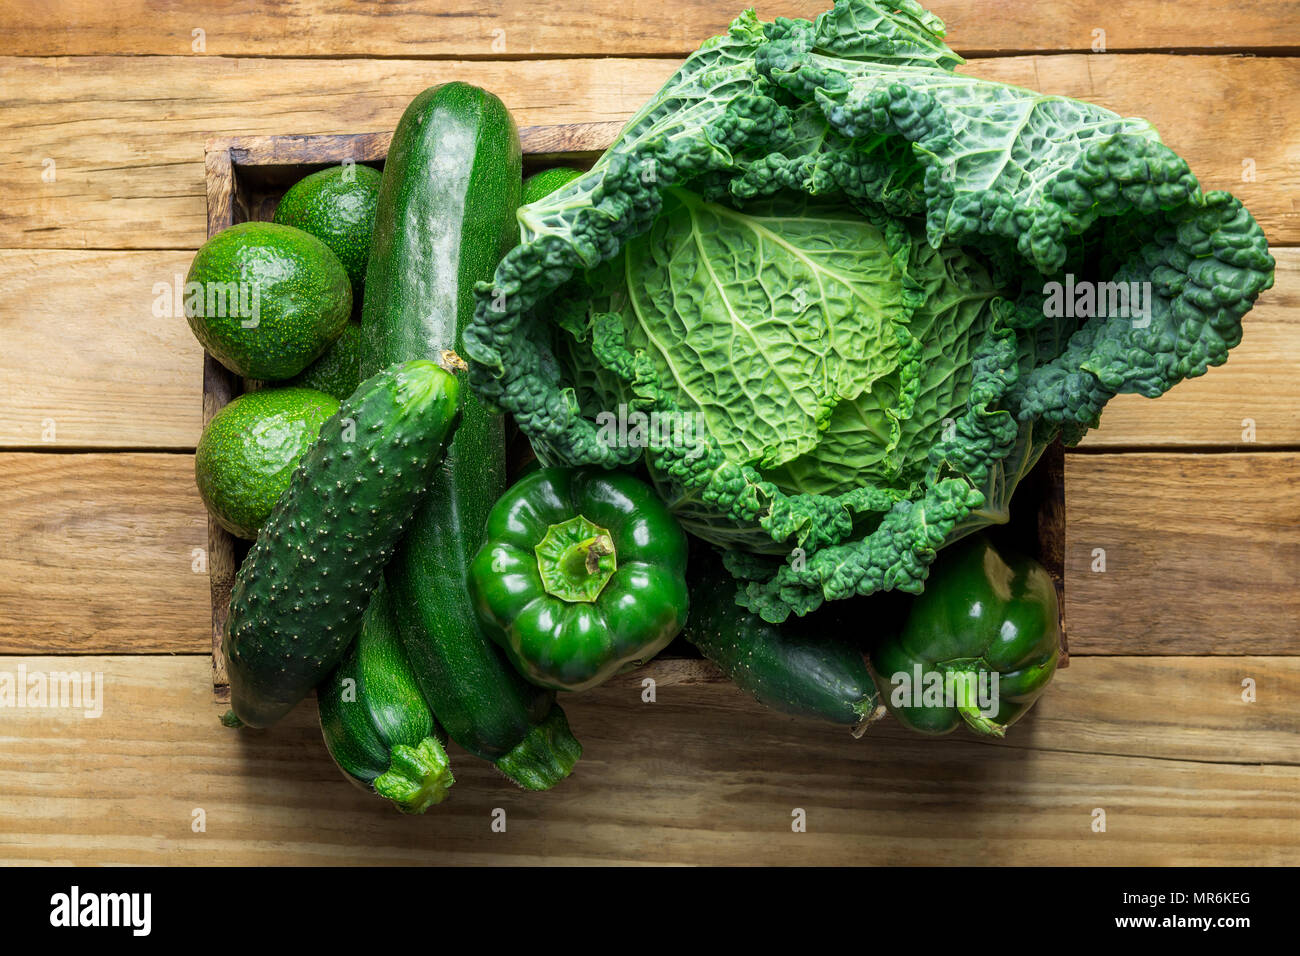 Box with Fresh Organic Green Vegetables Savoy Cabbage Zucchini Cucumbers Bell Peppers Avocados on Aged Plank Wood Background. Superfoods Vegan Plant B Stock Photo